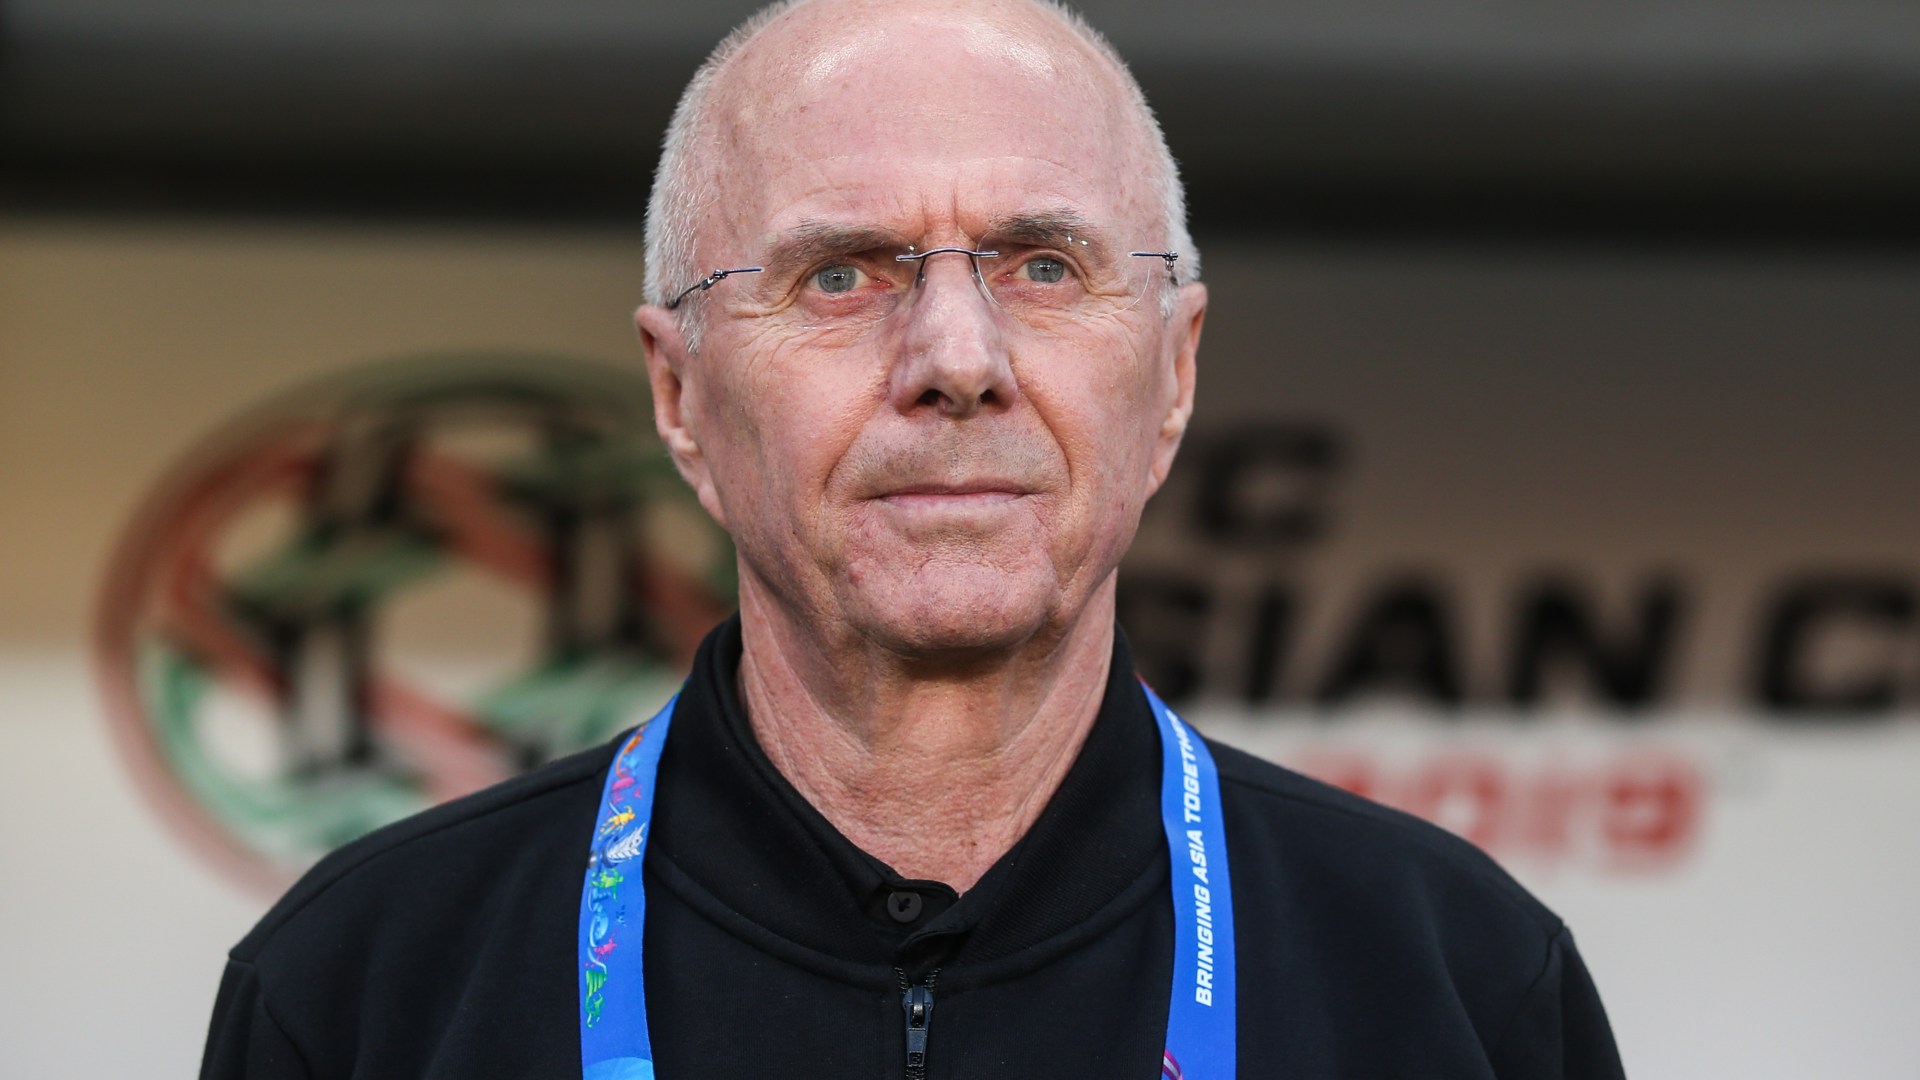 Former England manager Sven-Goran Eriksson, 75, reveals he has cancer and has 'at best a year to live'